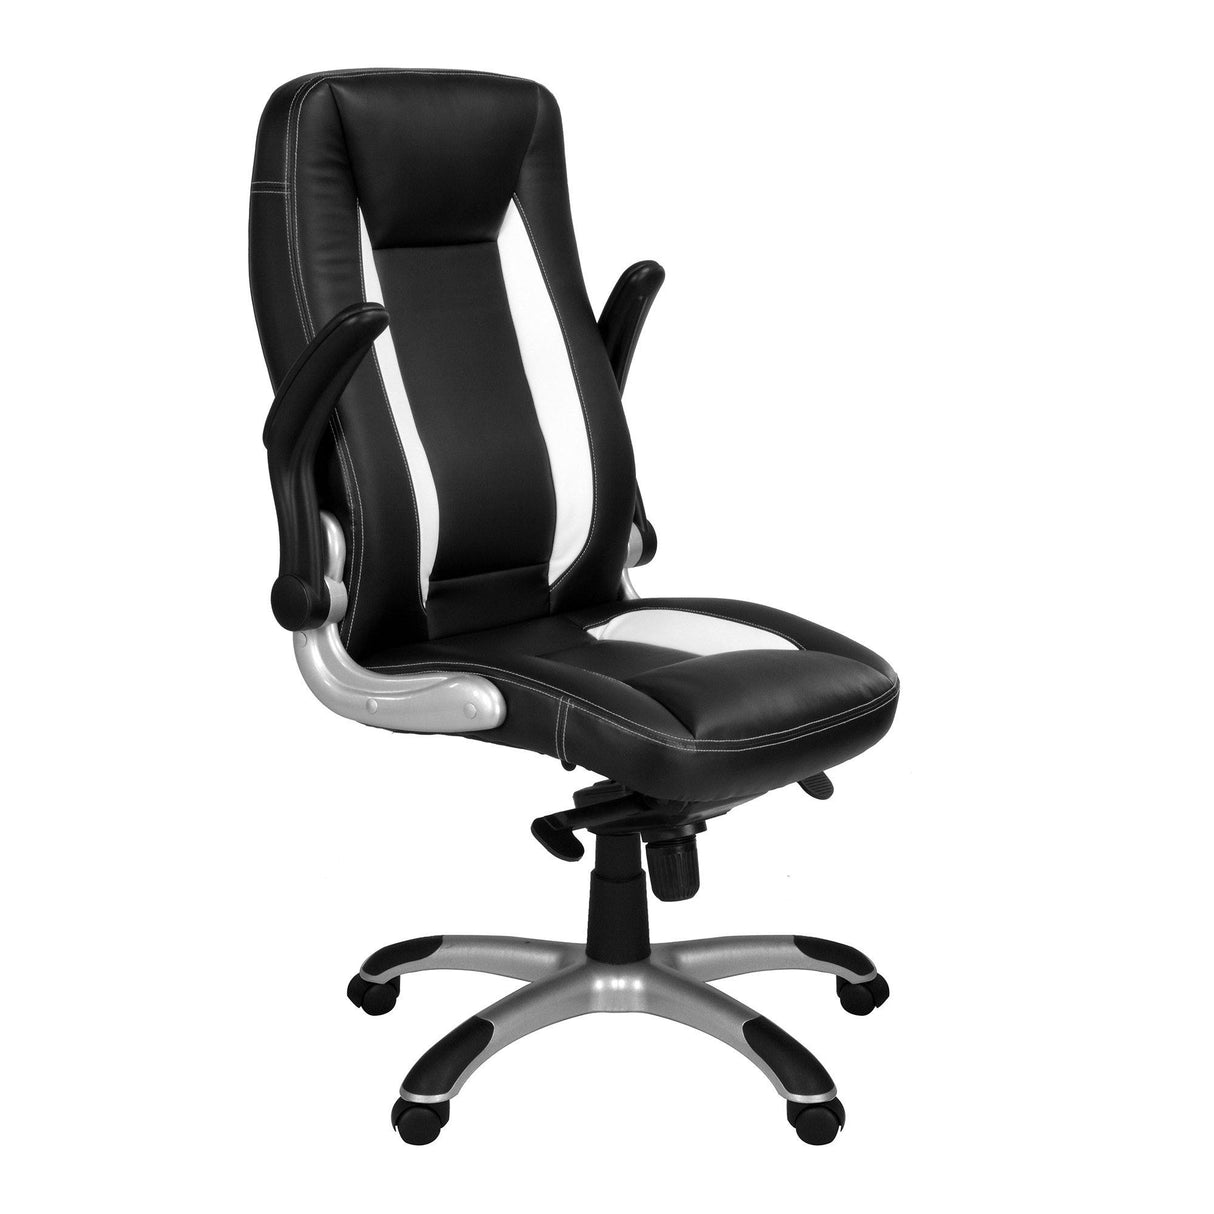 Nautilus Designs Friesian High Back Executive Chair with Folding Arms and Satin Chrome Base - Black and White